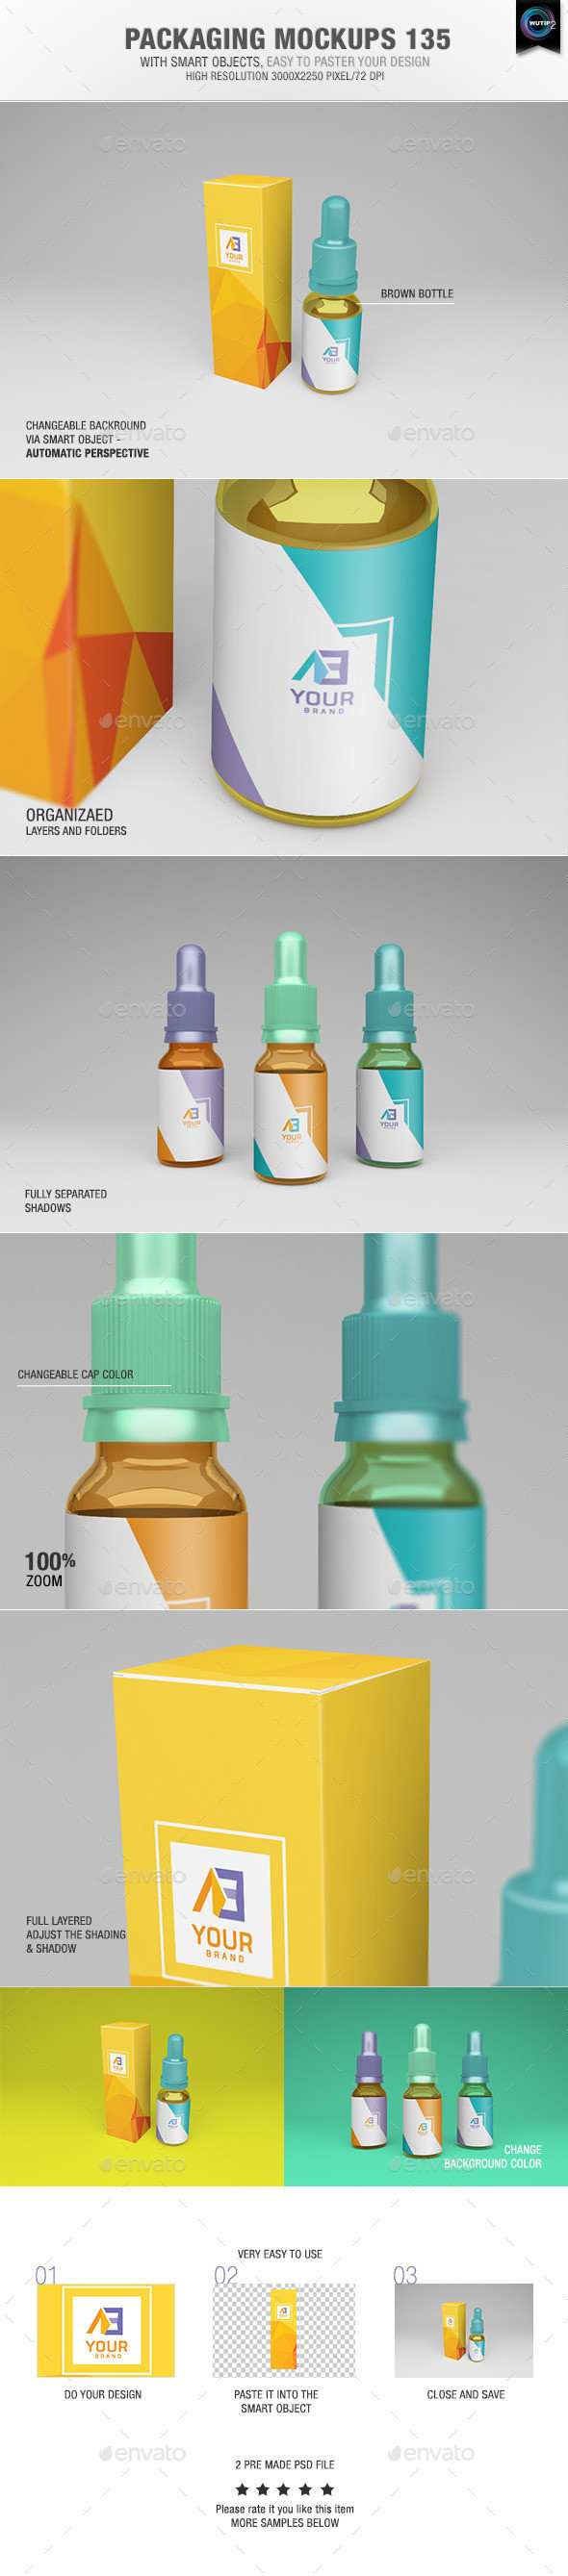 Packaging 20mockups 20135 20preview